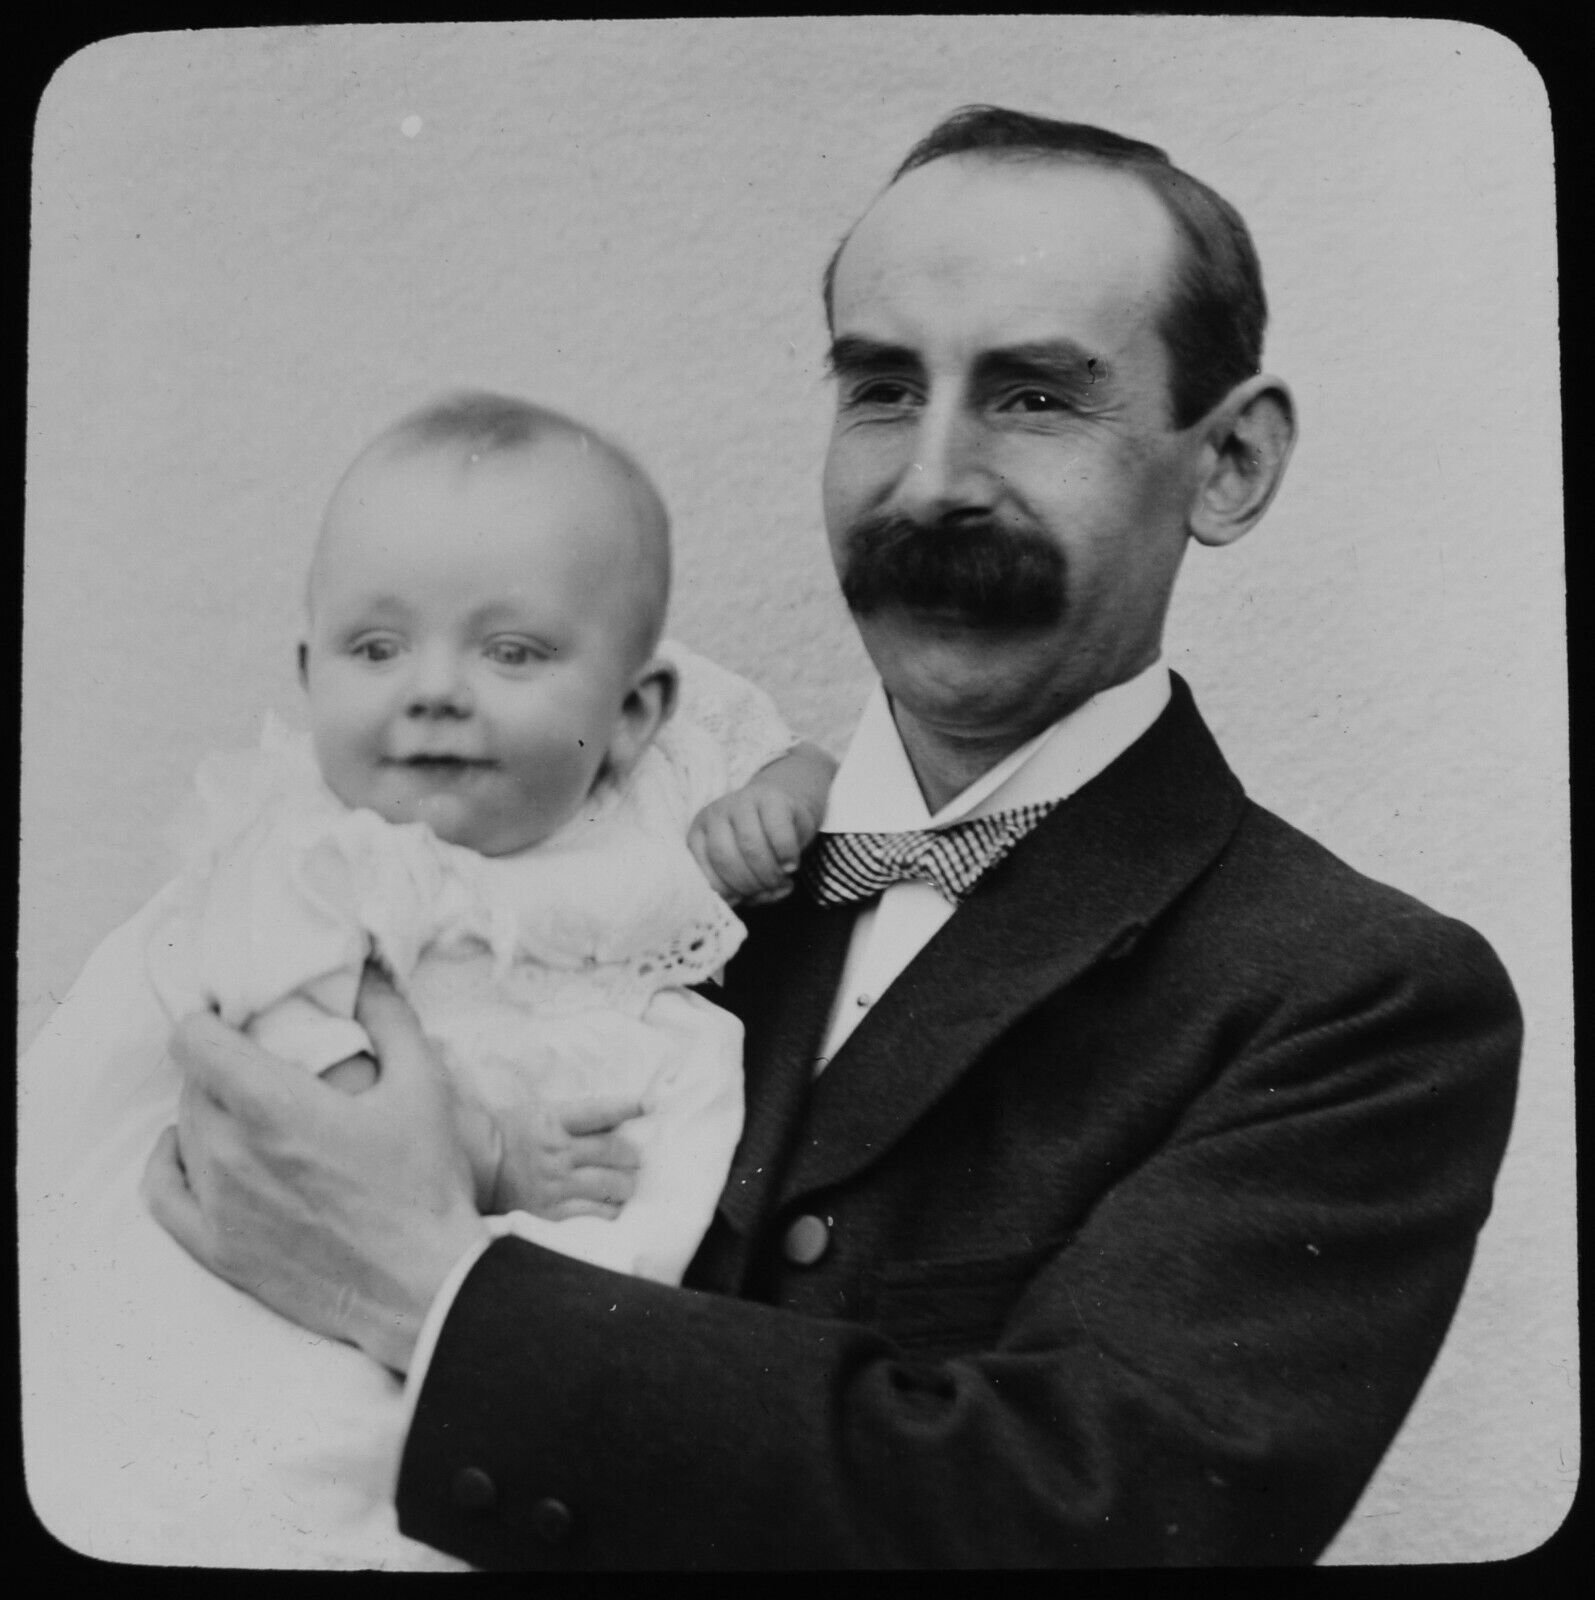 Magic Lantern Slide MAN WITH MAGNIFICENT MUSTACHE HOLIDNG BABY C1910 PHOTO